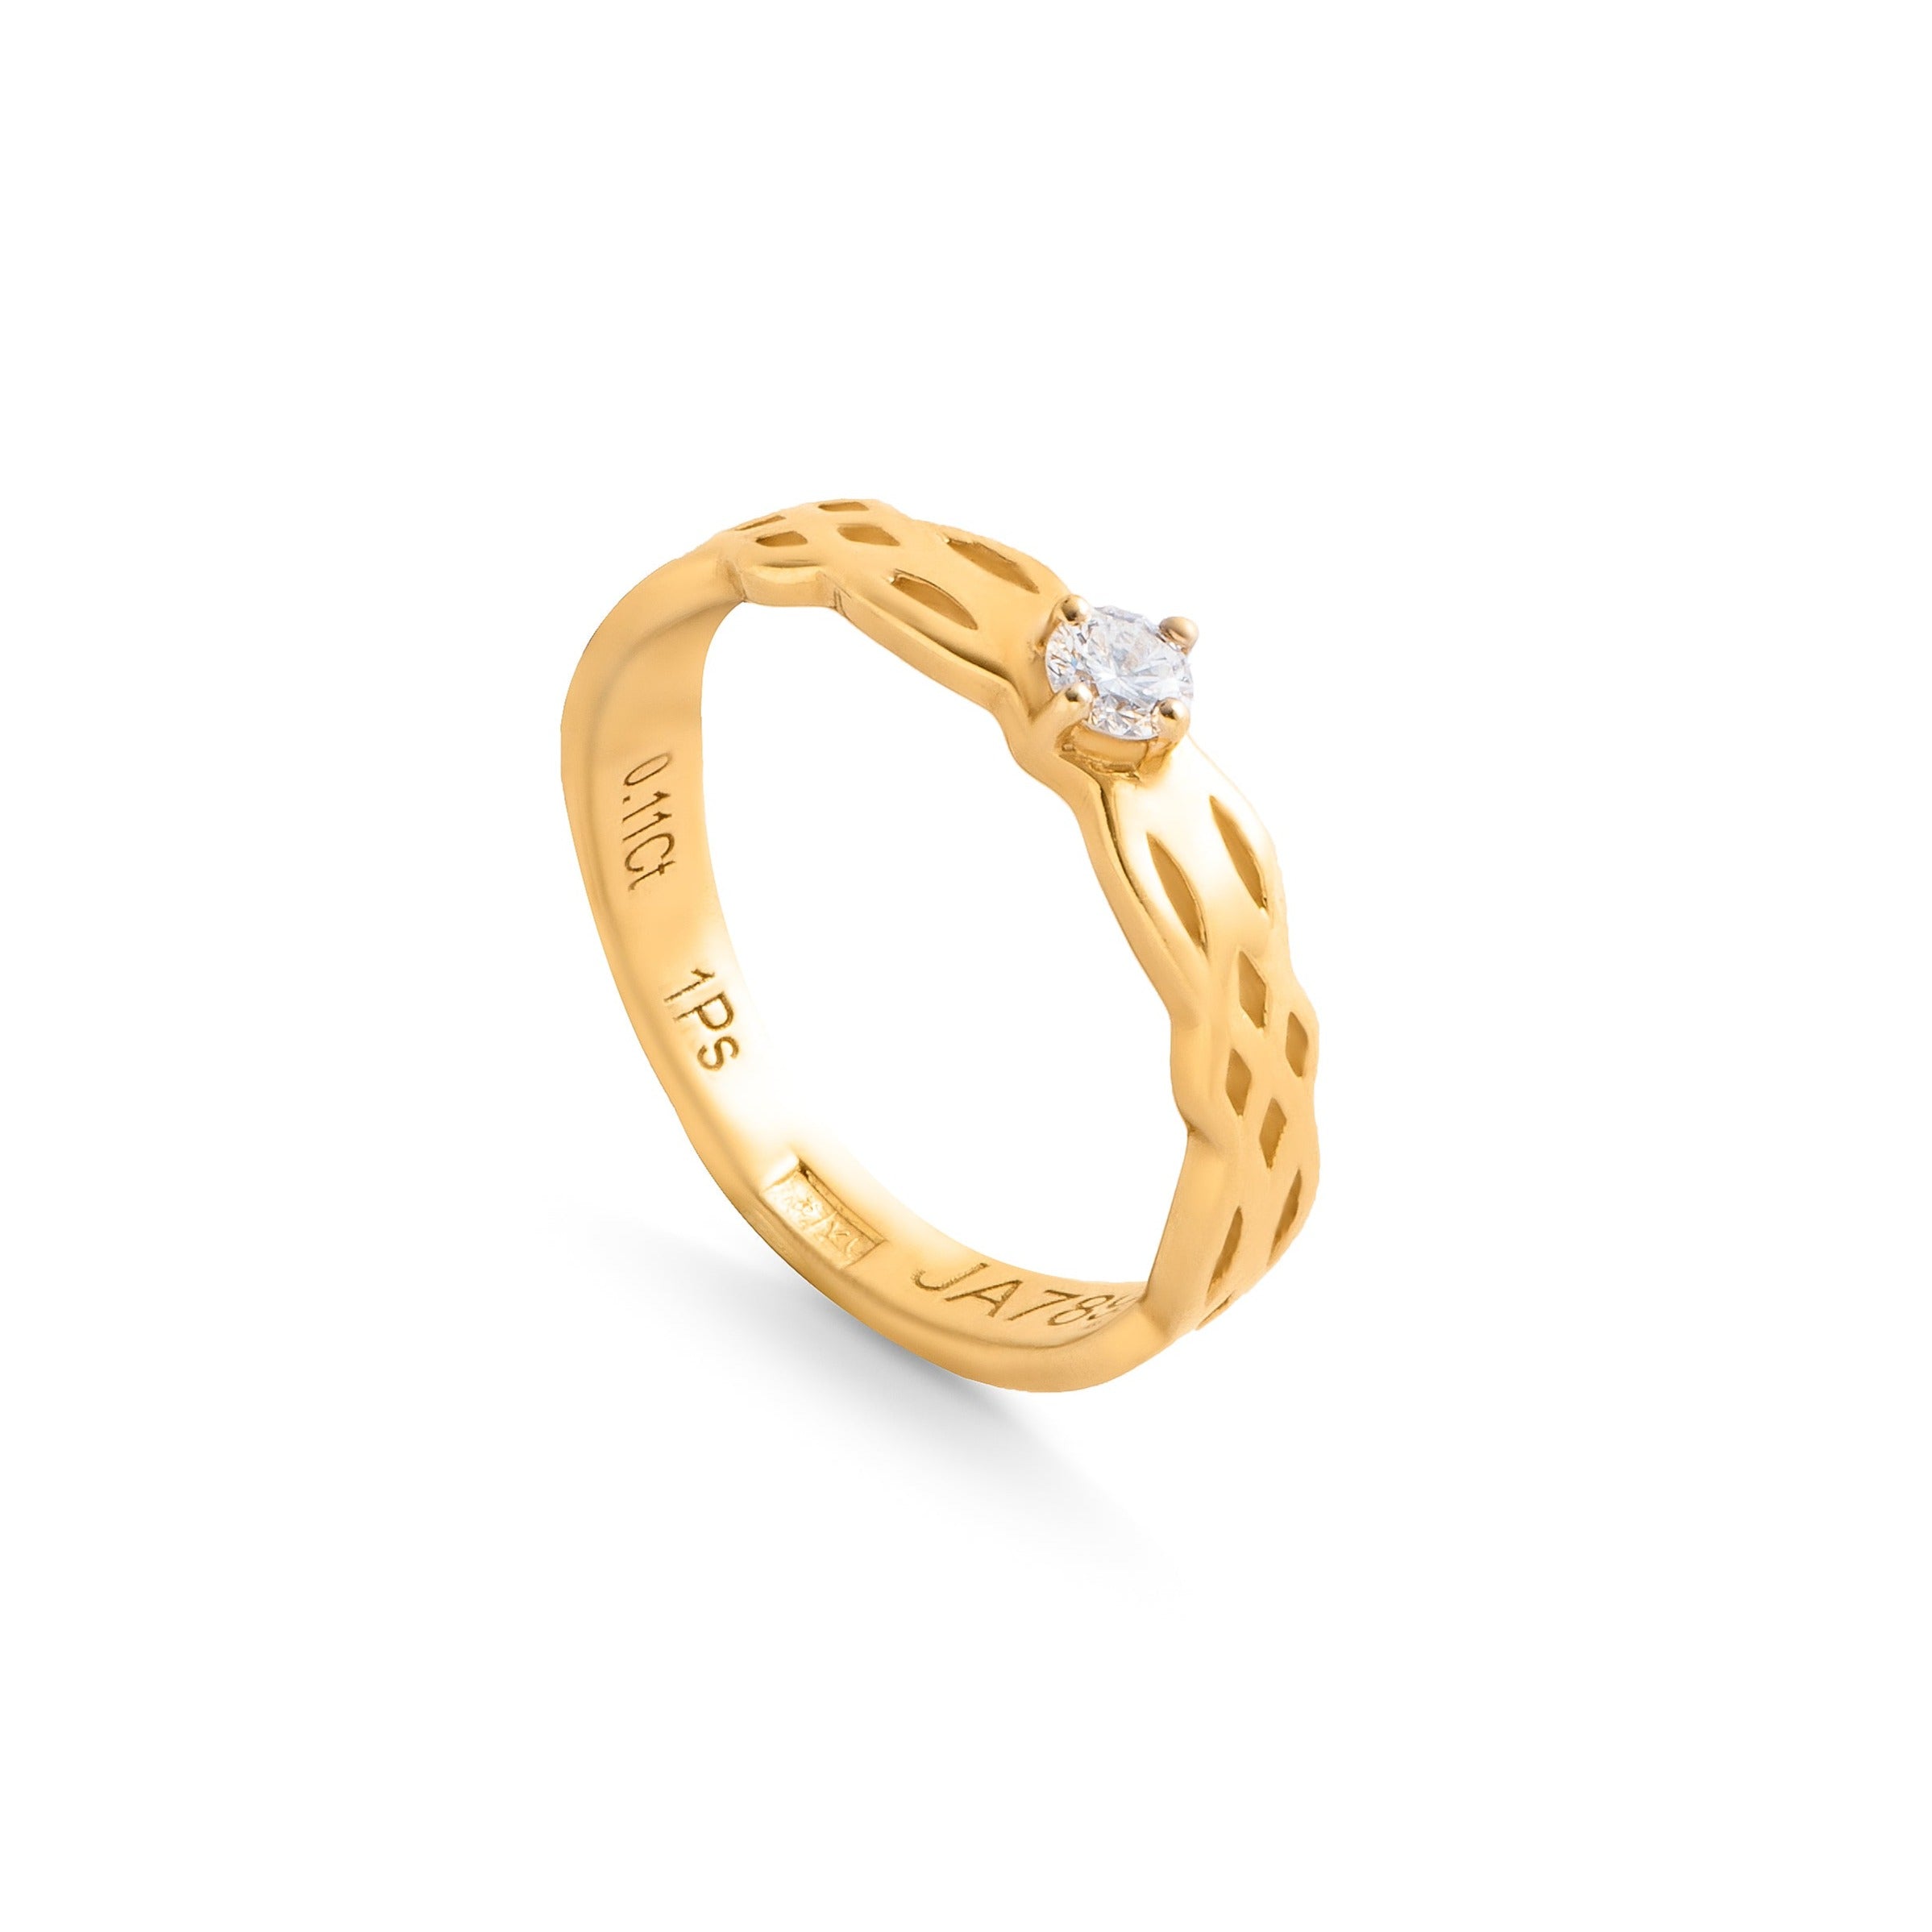 A diamond stone in an 18k yellow gold band - SIR412